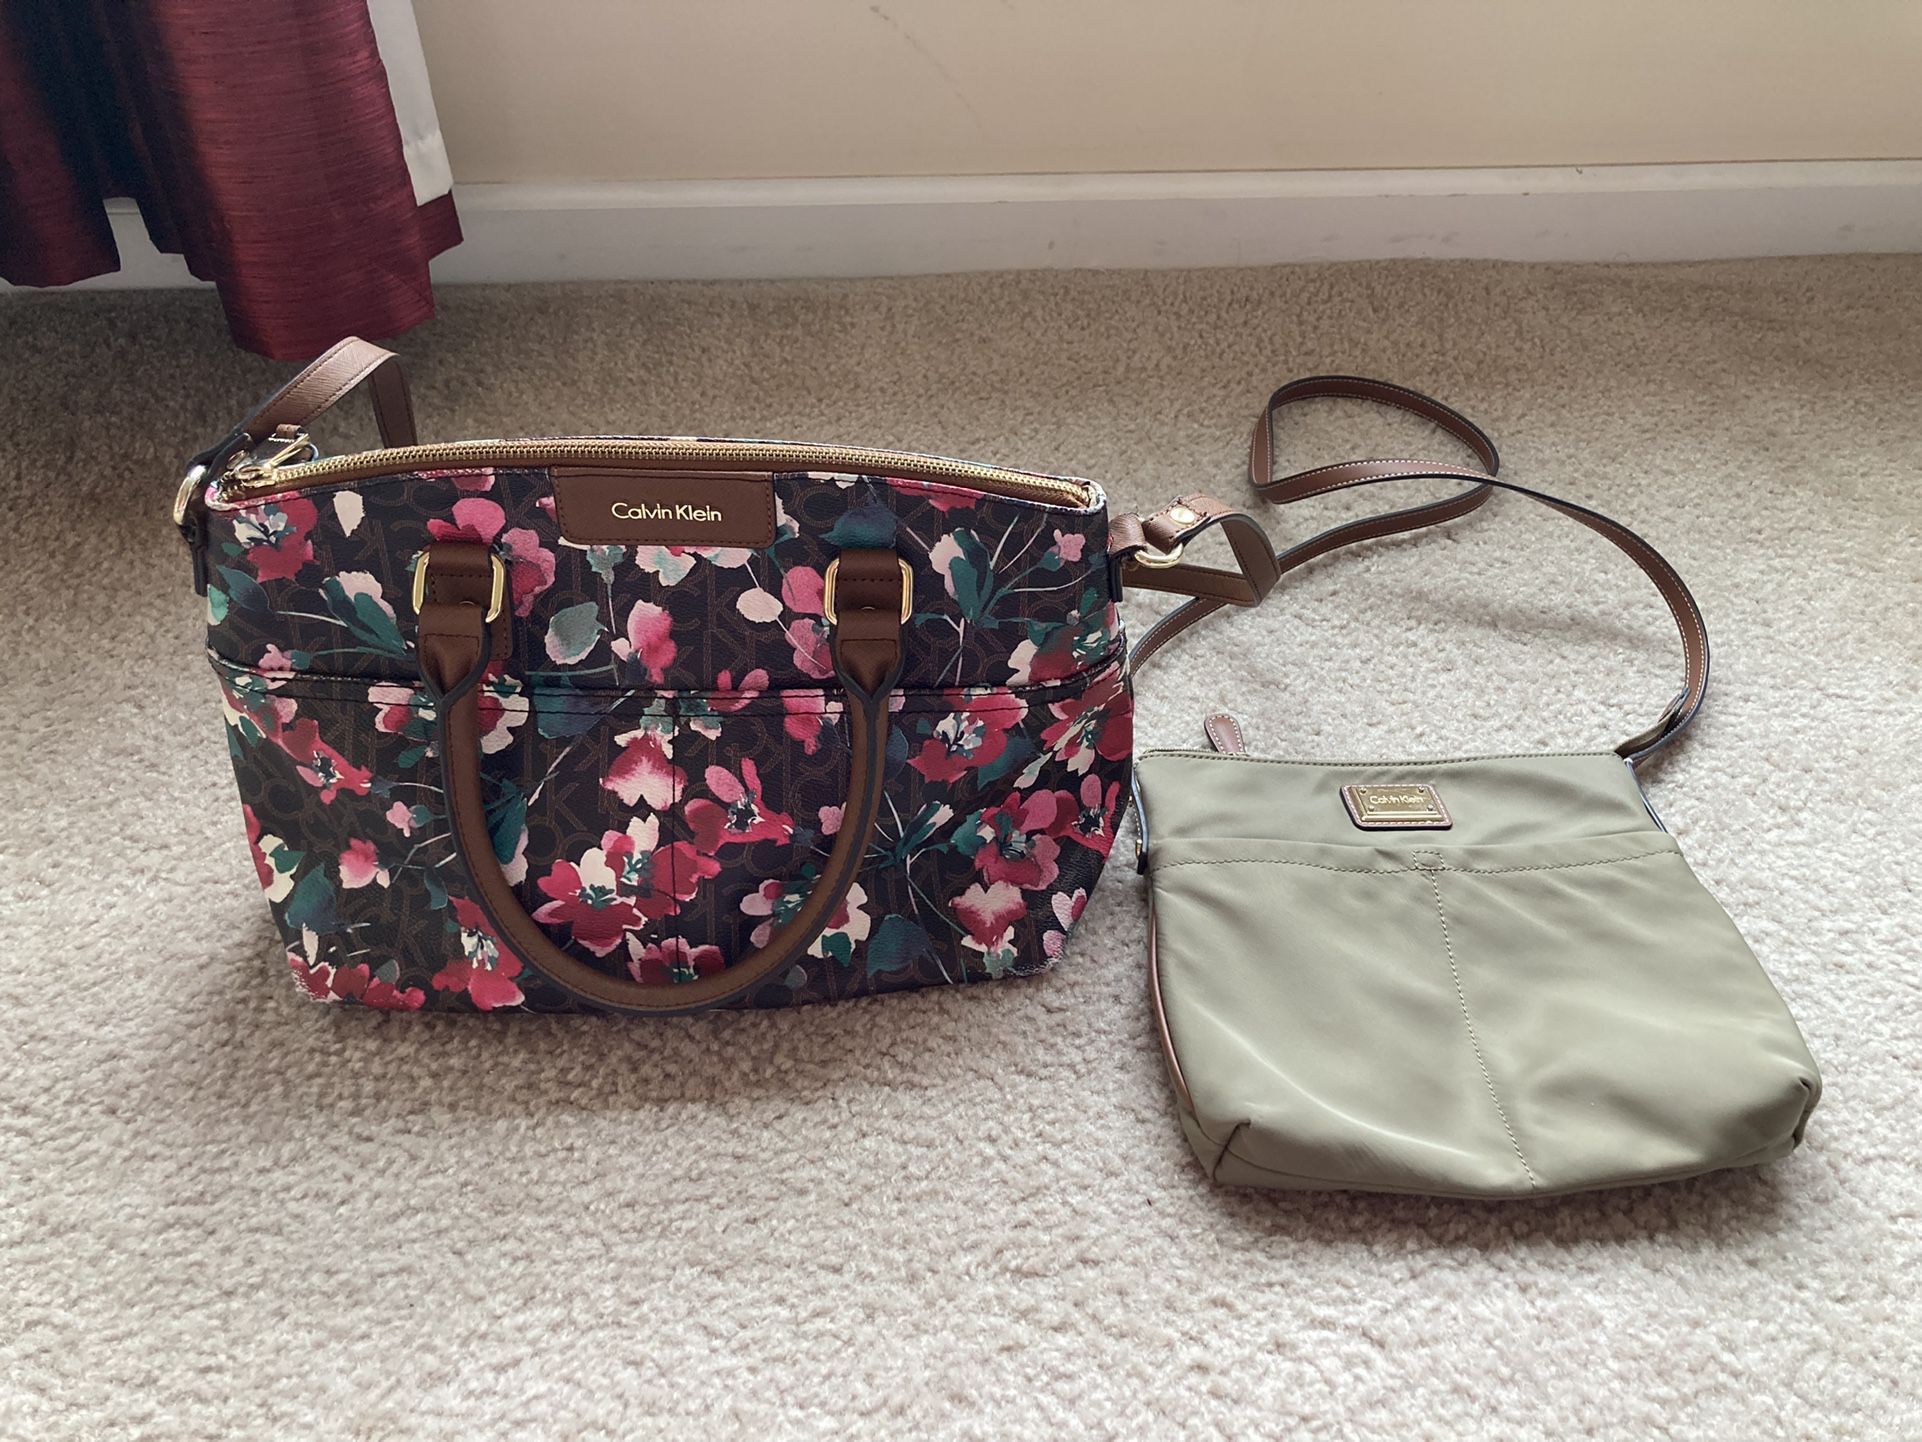 Calvin Klein Purses for Sale in Plainfield, IL - OfferUp